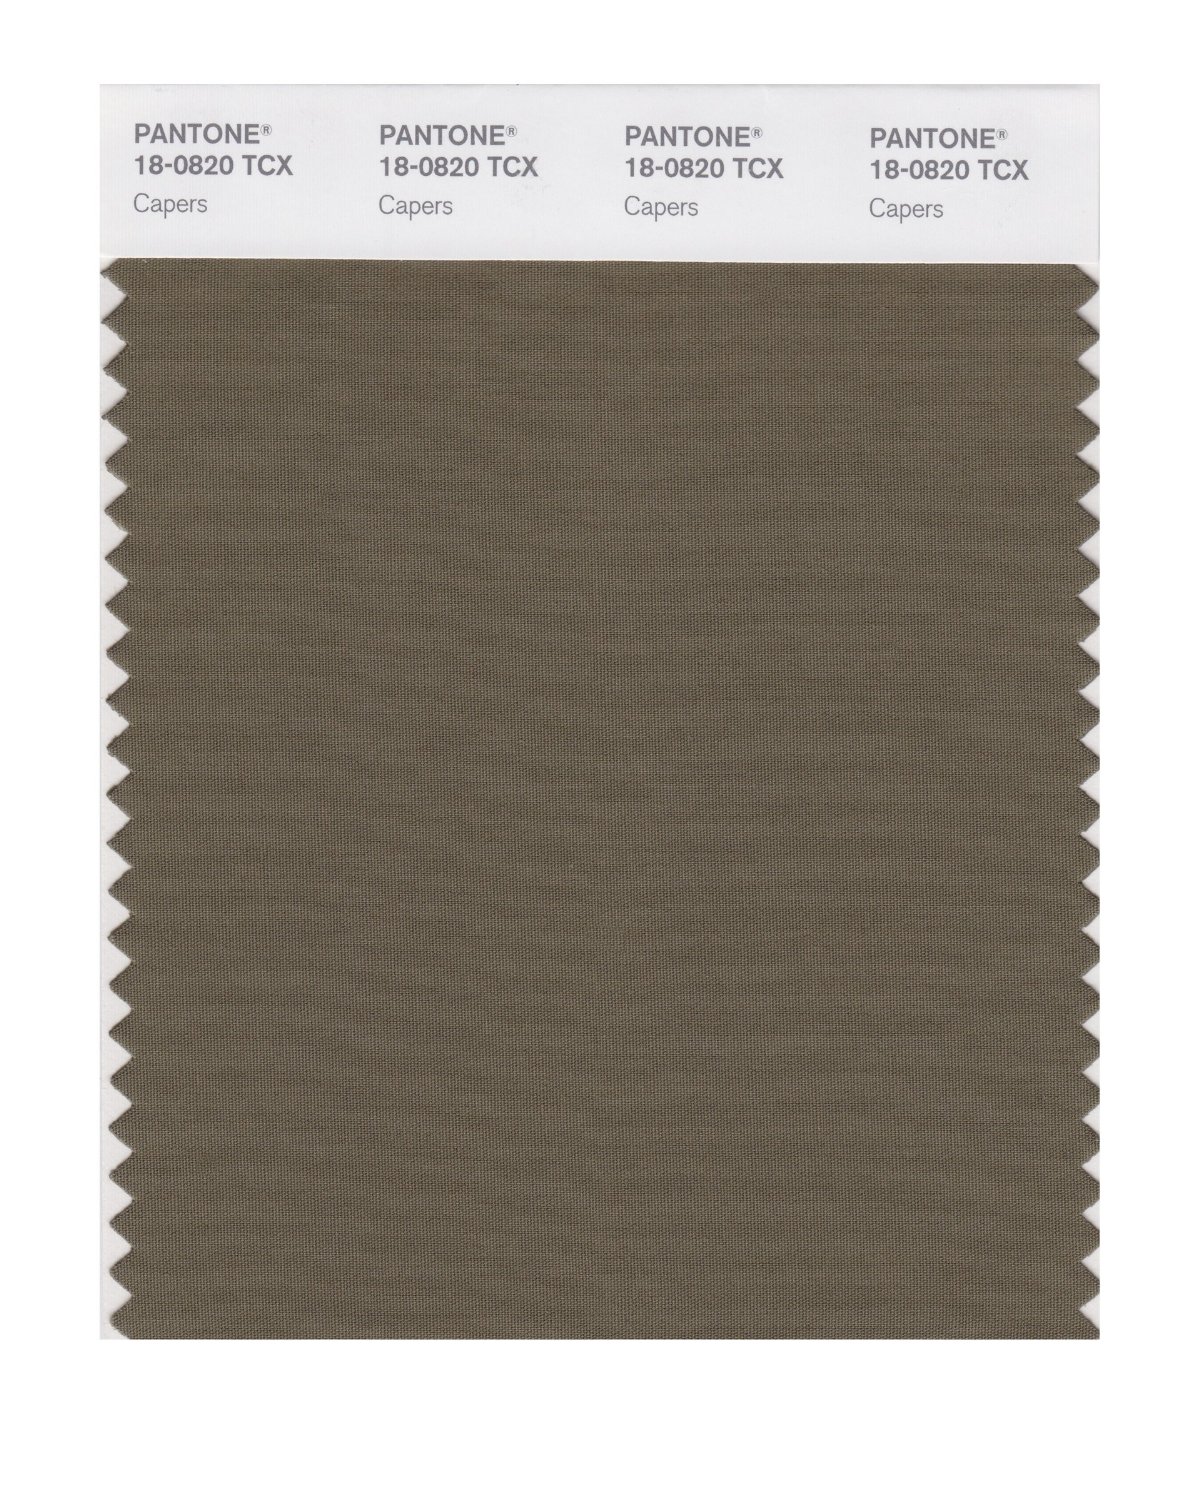 Pantone Cotton Swatch 18-0820 Capers